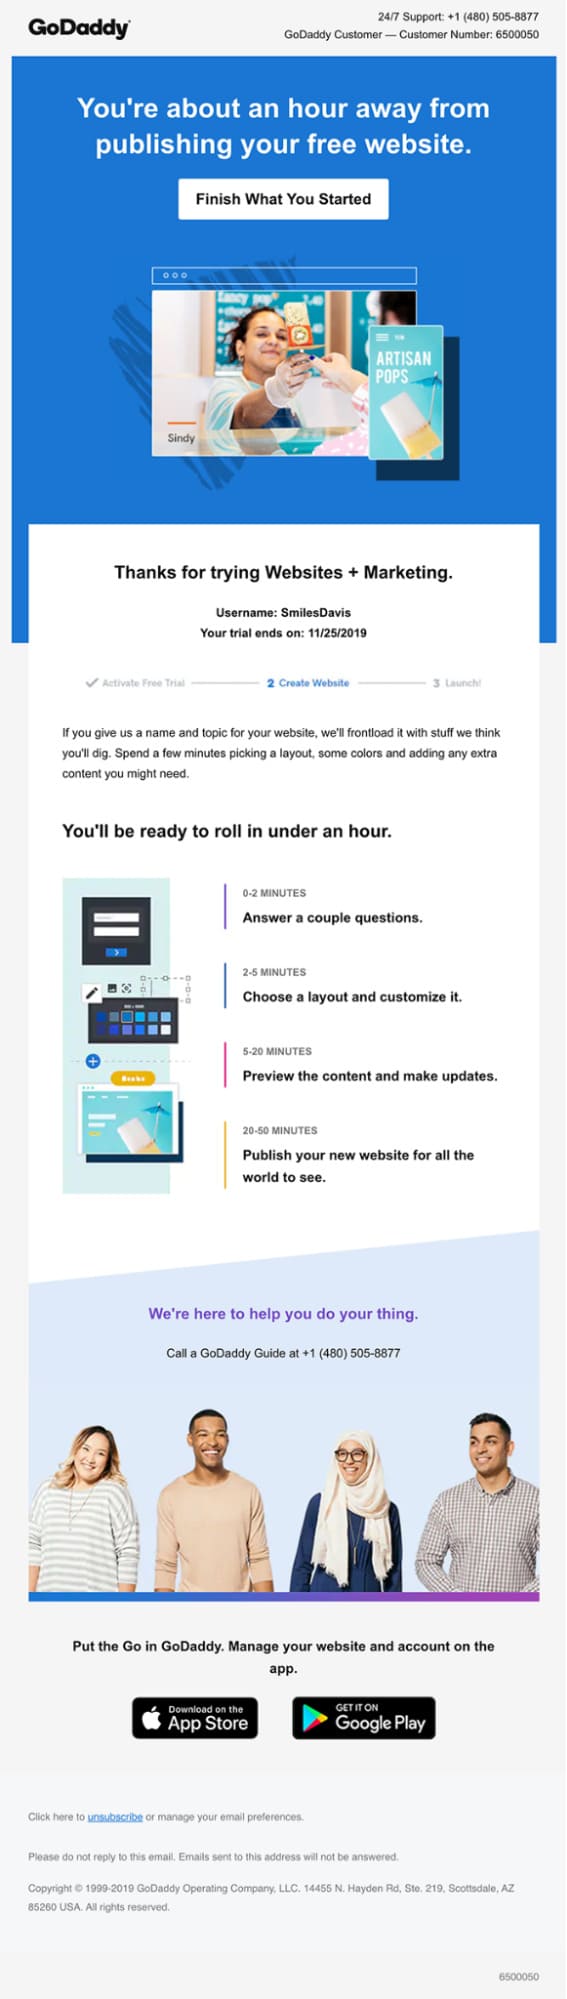 /email-marketing-example-of-visually-appealing-email